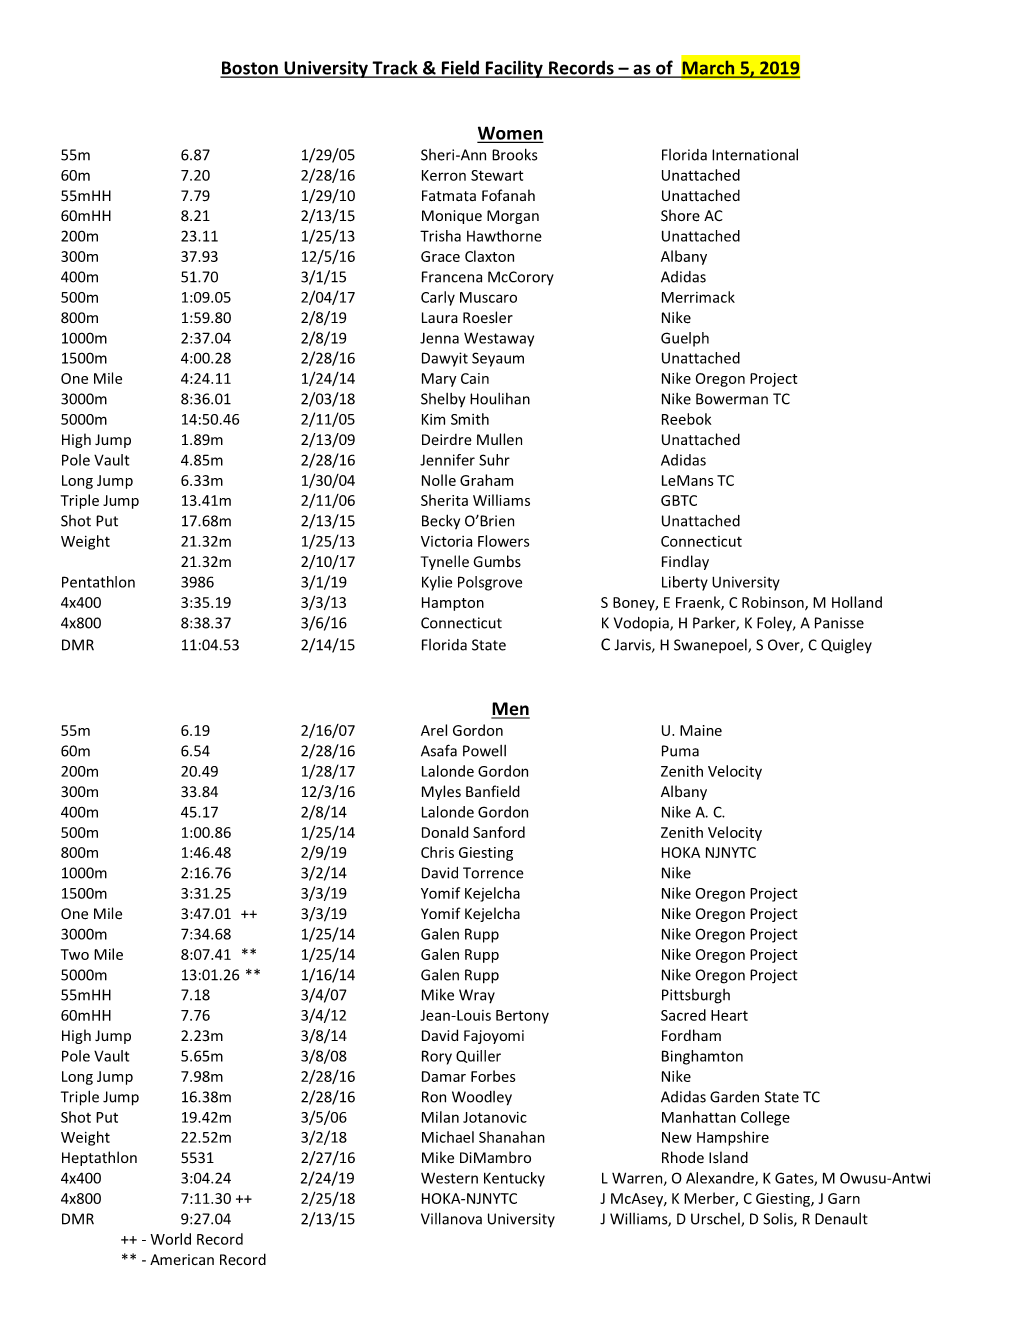 Boston University Track & Field Facility Records – As of March 5